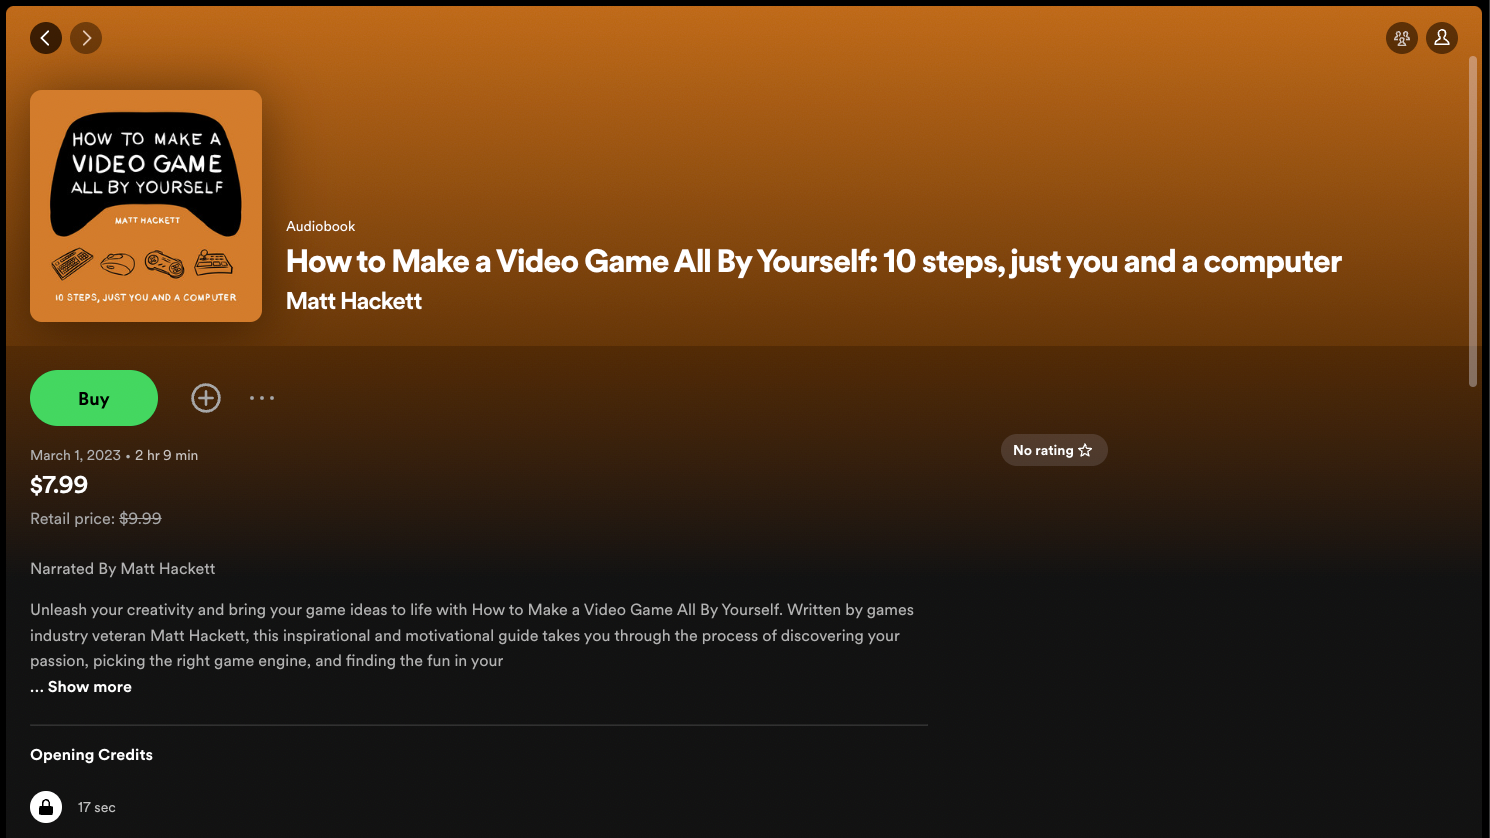 How to Make a Video Game All By Yourself on Spotify.